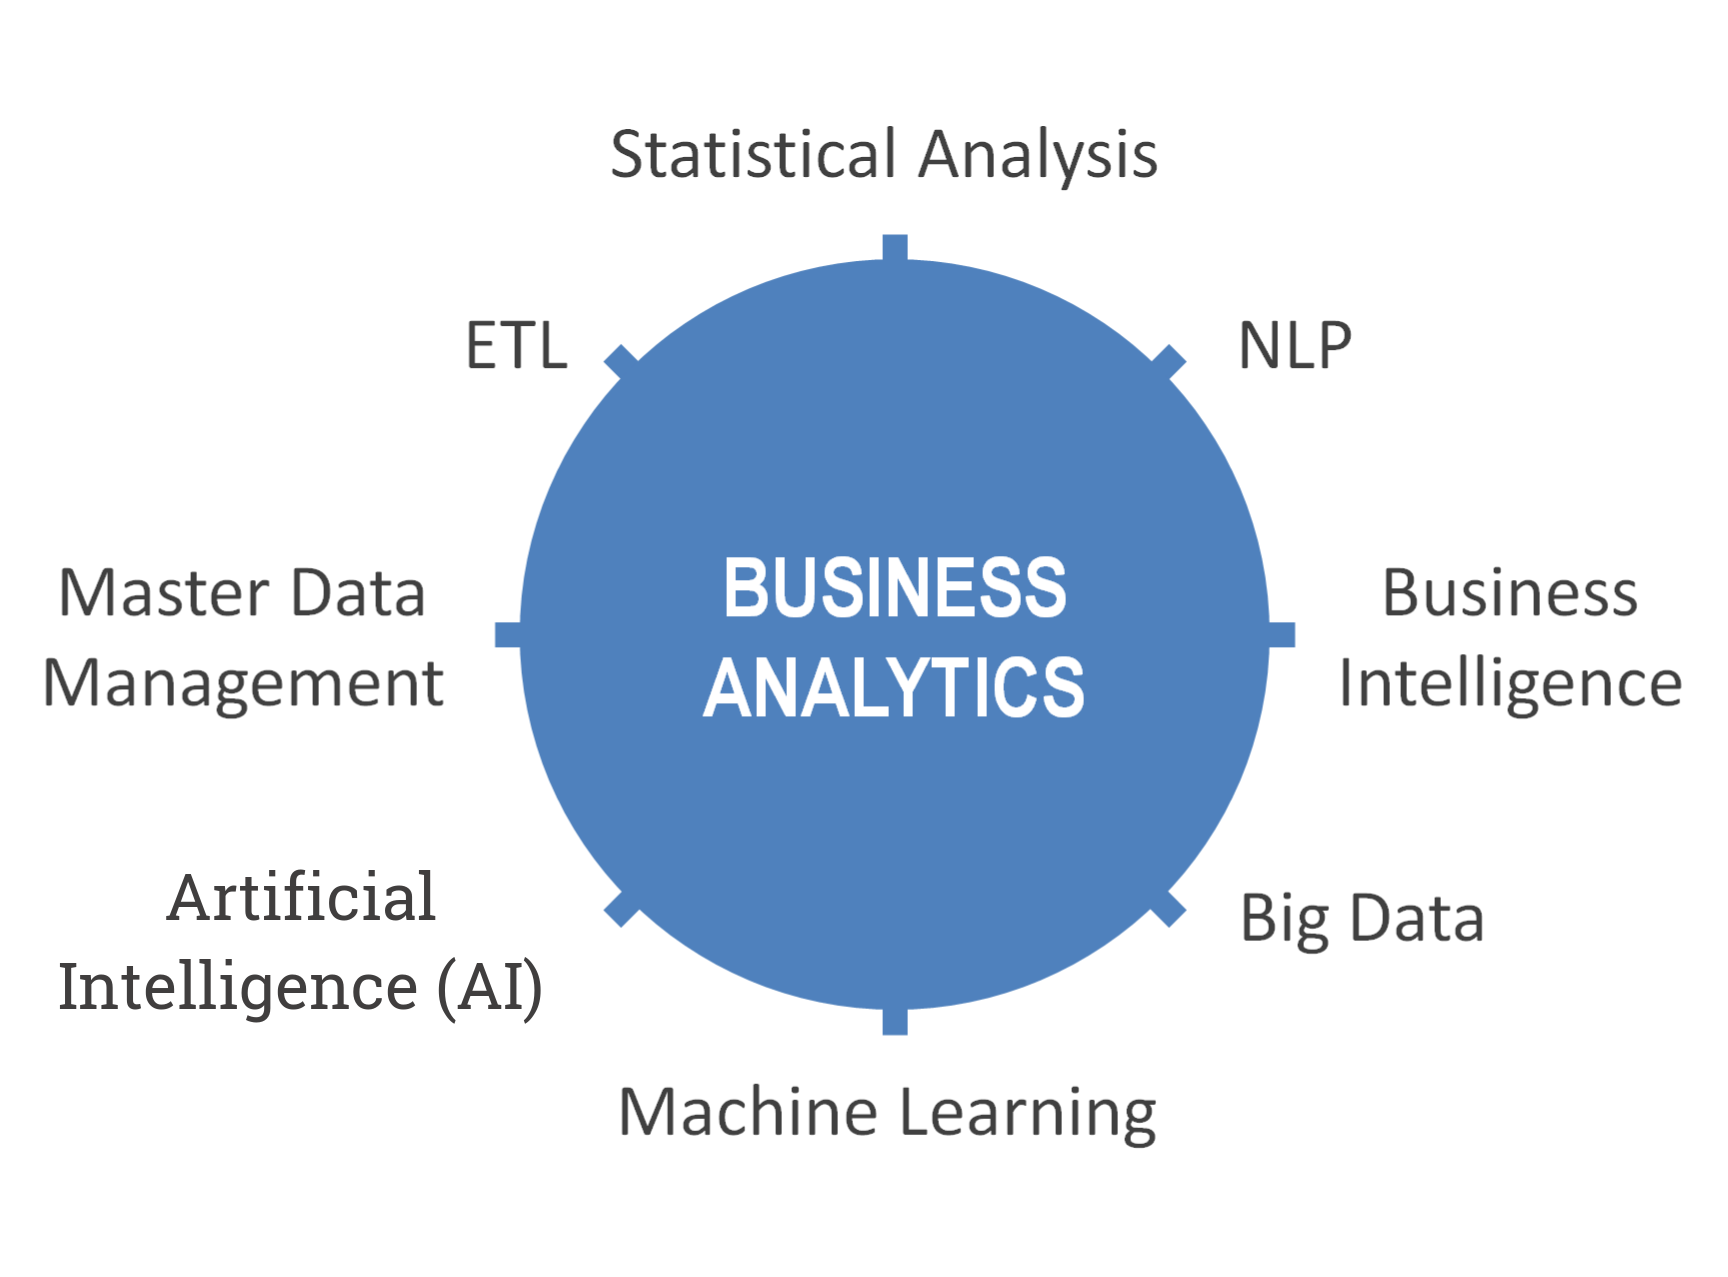 What is business analytics?